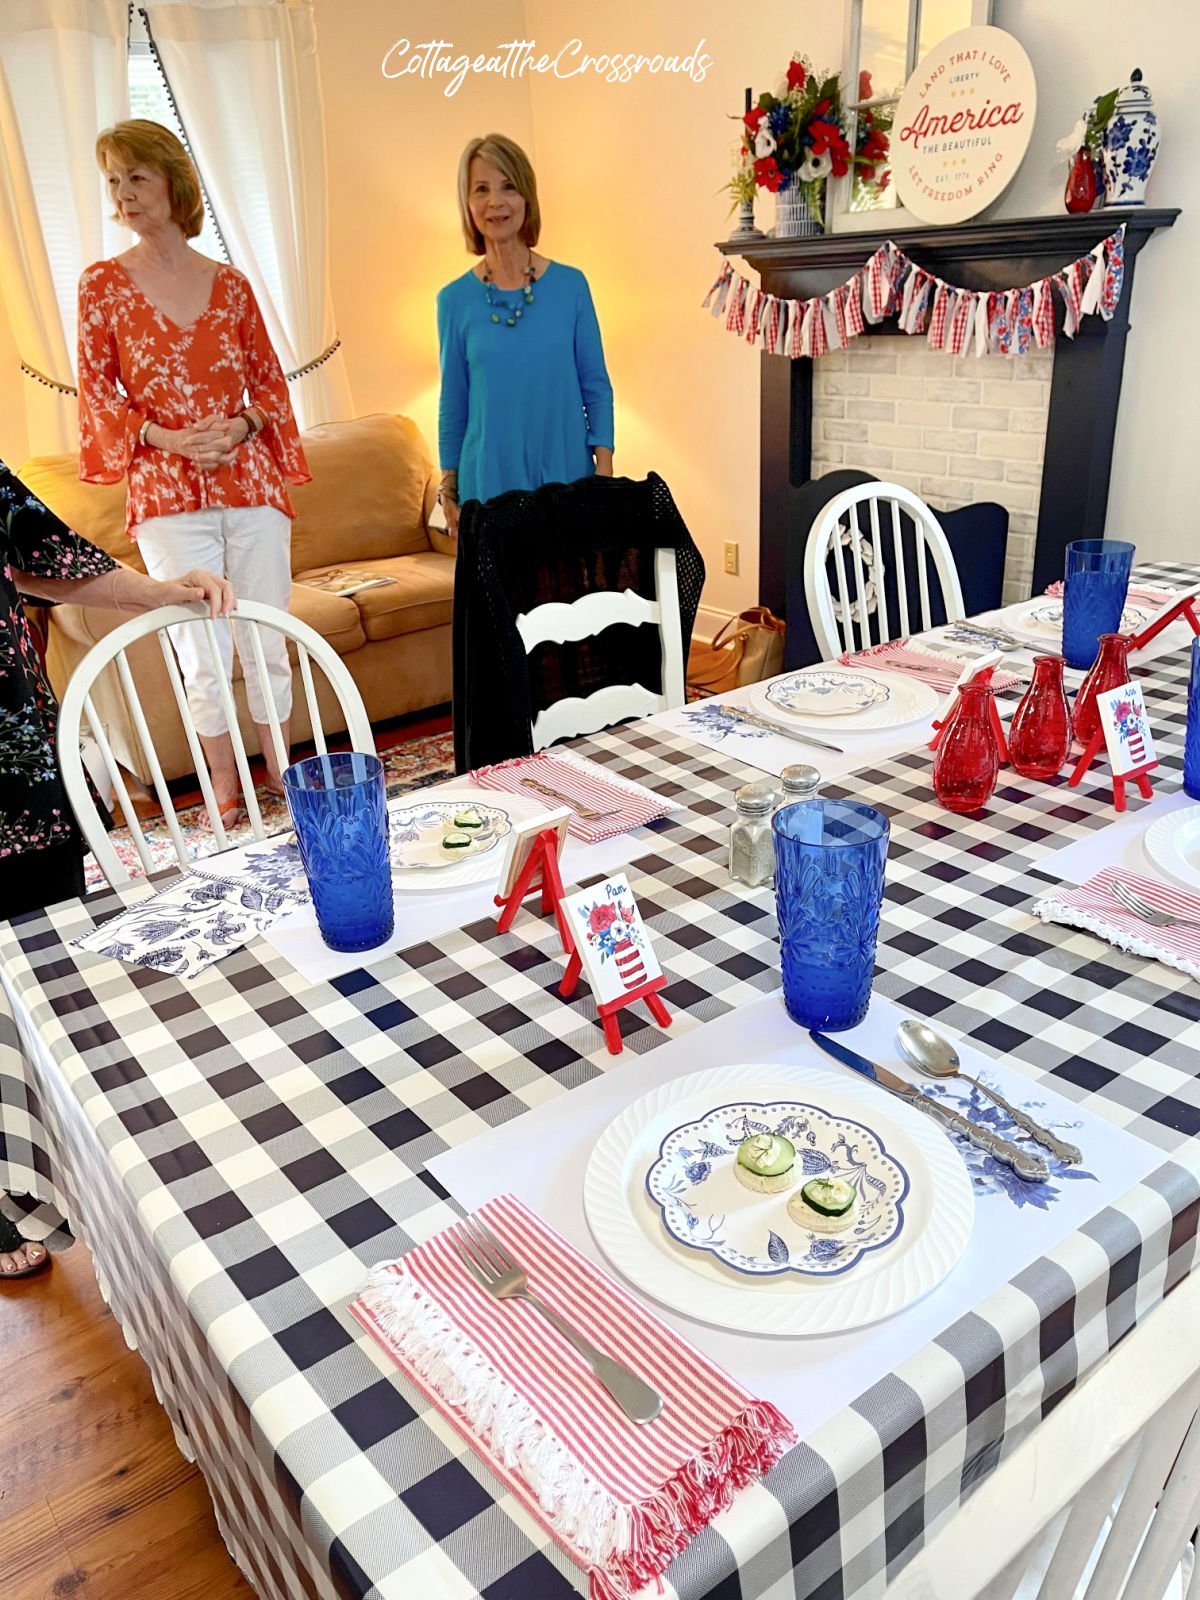 Red, white, and blue tablesetting